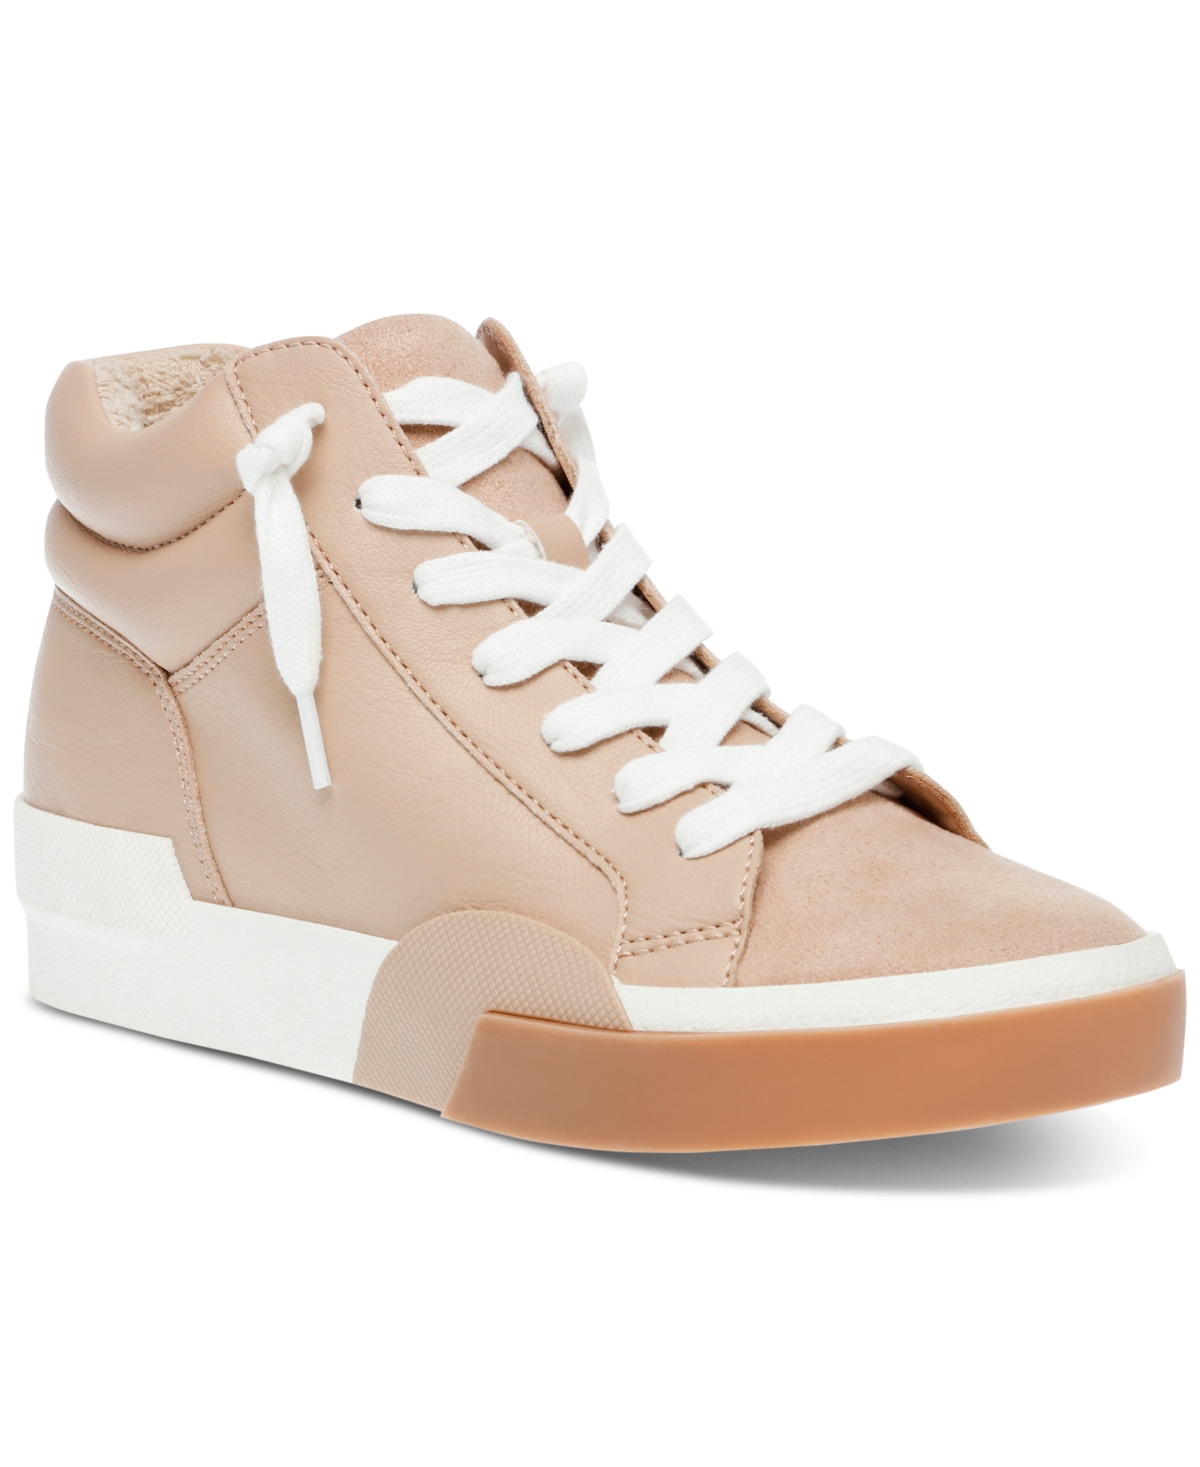 Women's Holand Lace-Up High Top Sneakers - Sand